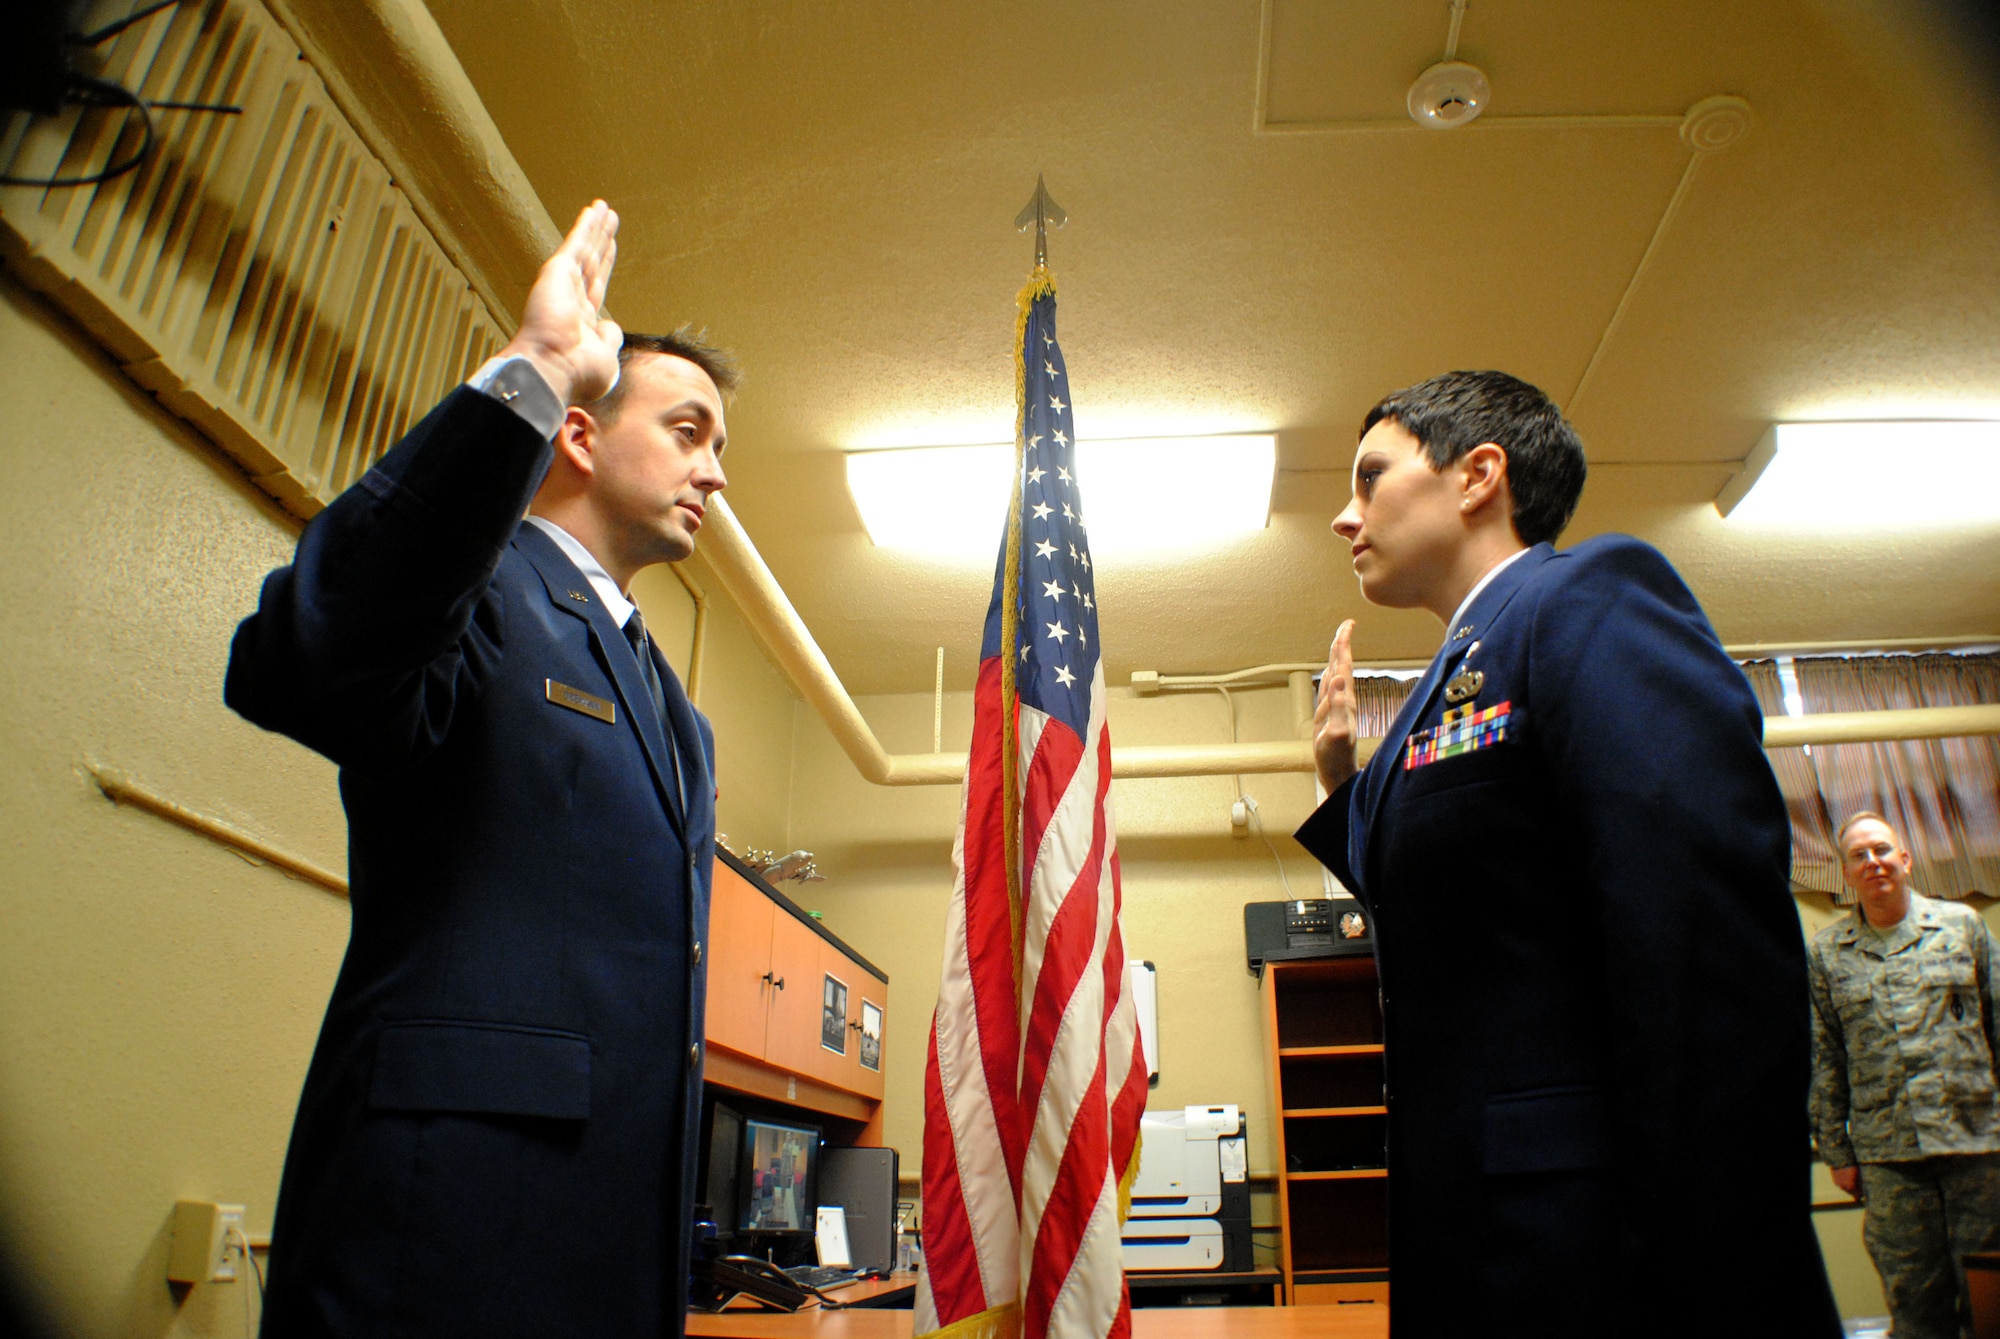 Capt. Timothy Dremann (left), Air Force ROTC Detachment 610 recruiting flight commander administers the Oath of Office to former Staff Sgt. Donna Tluczek (right), who became a medical officer in the Air Force during a commissioning ceremony, Feb. 2, 2012, at AF ROTC Det. 610 headquarters inside the University of North Dakota Armory. Prior to commissioning as a second lieutenant in the United States Air Force Nurse Corps, Tluczek was stationed as an enlisted member at Grand Forks Air Force Base, N.D., for three years, and served as a radar maintenance and electronics specialist. (U.S. Air Force photo/Senior Airman Luis Loza Gutierrez)